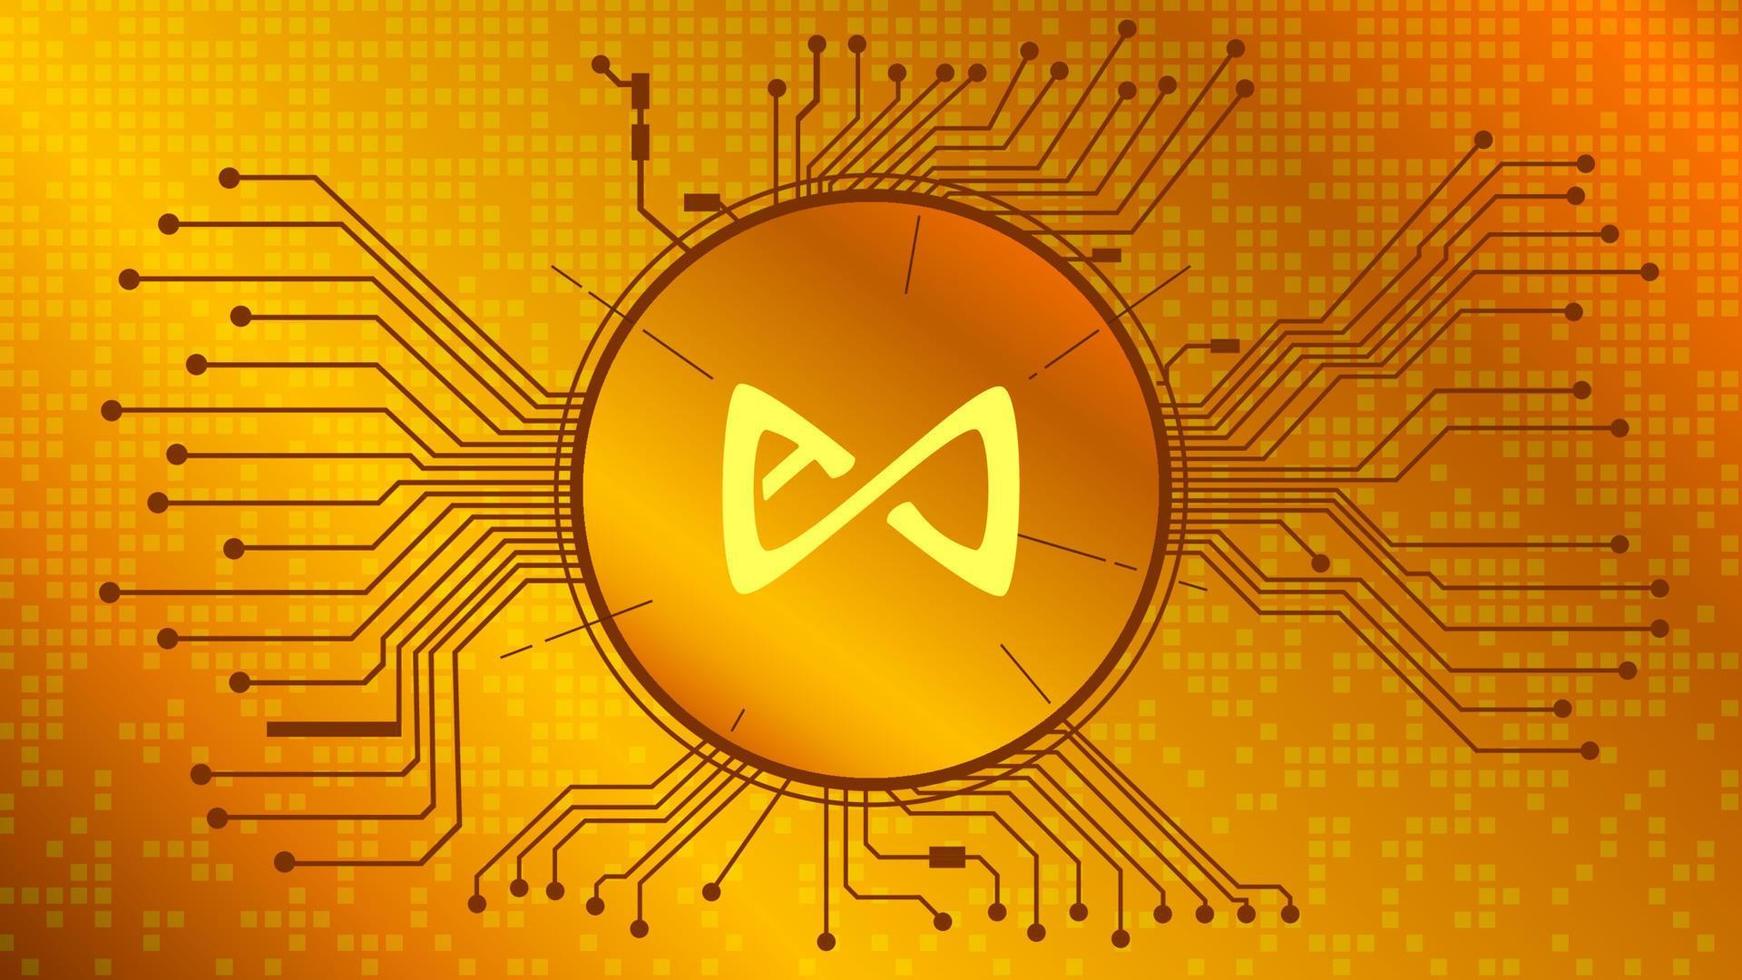 Axie Infinity AXS cryptocurrency token symbol in circle with PCB tracks on gold background. Digital currency coin icon in techno style for website or banner. Vector illustration.